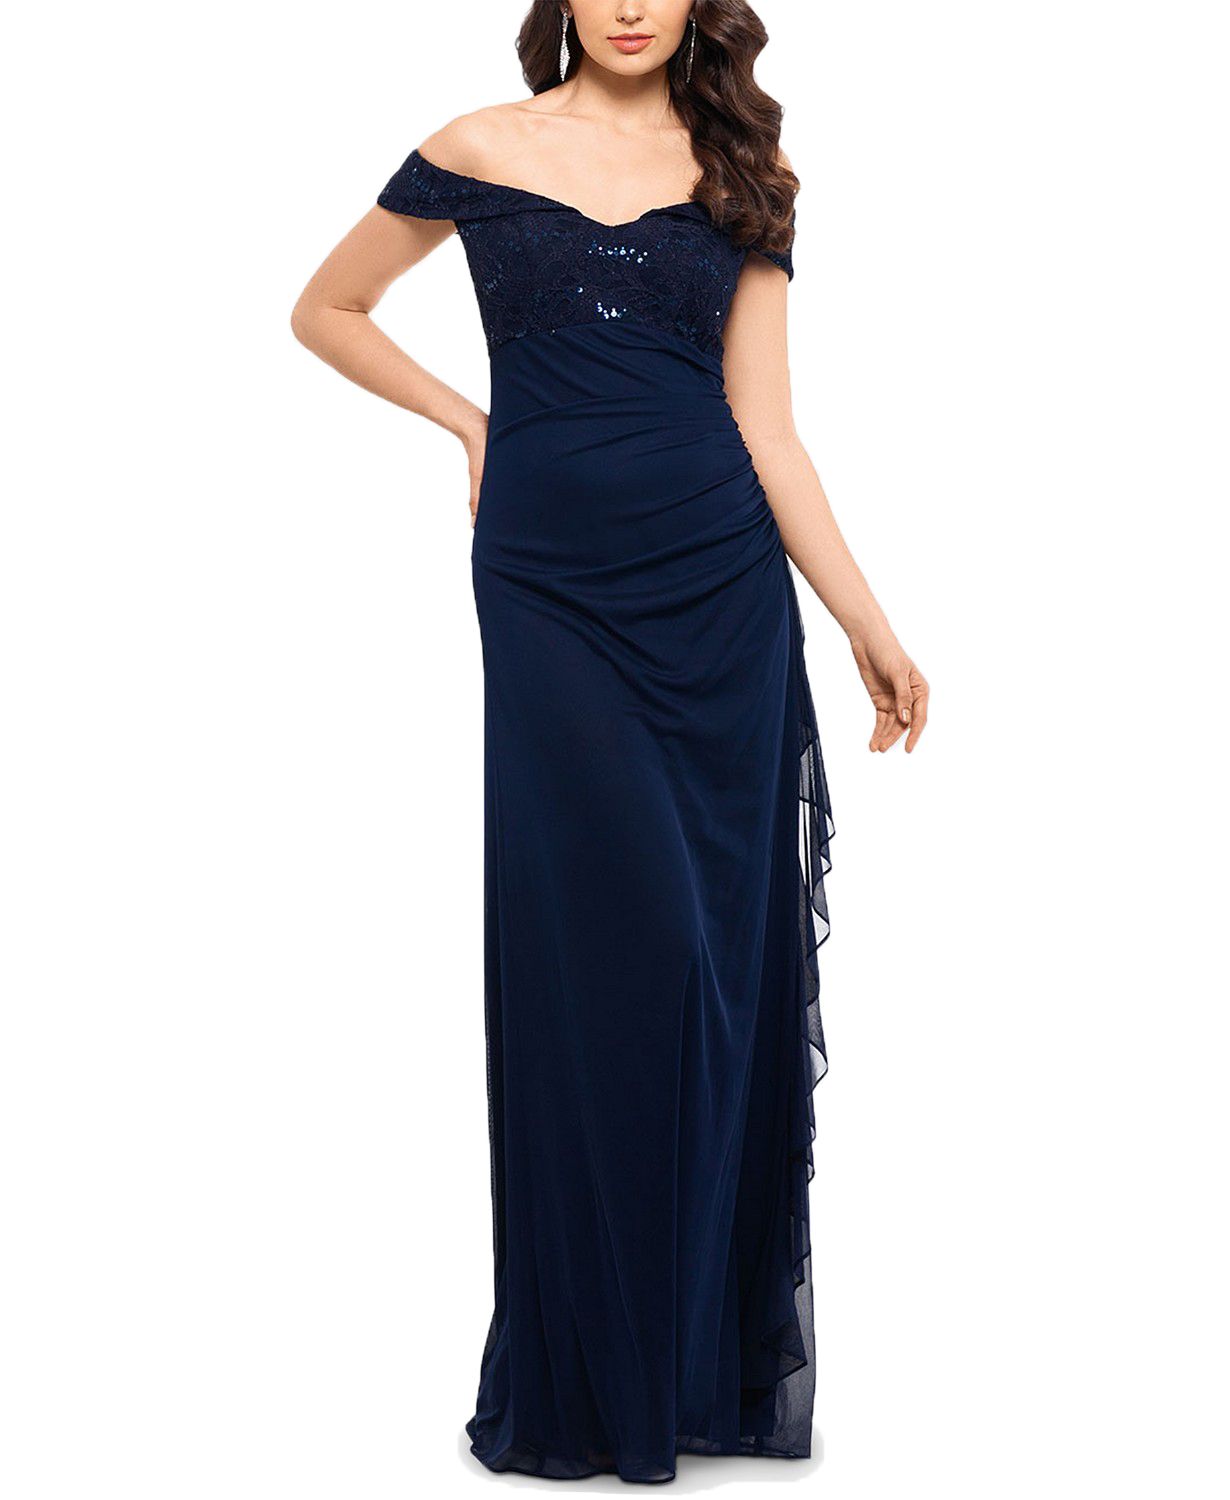 woocommerce-673321-2209615.cloudwaysapps.com-betsy-amp-adam-womens-petite-navy-lace-off-the-shoulder-gown-dress